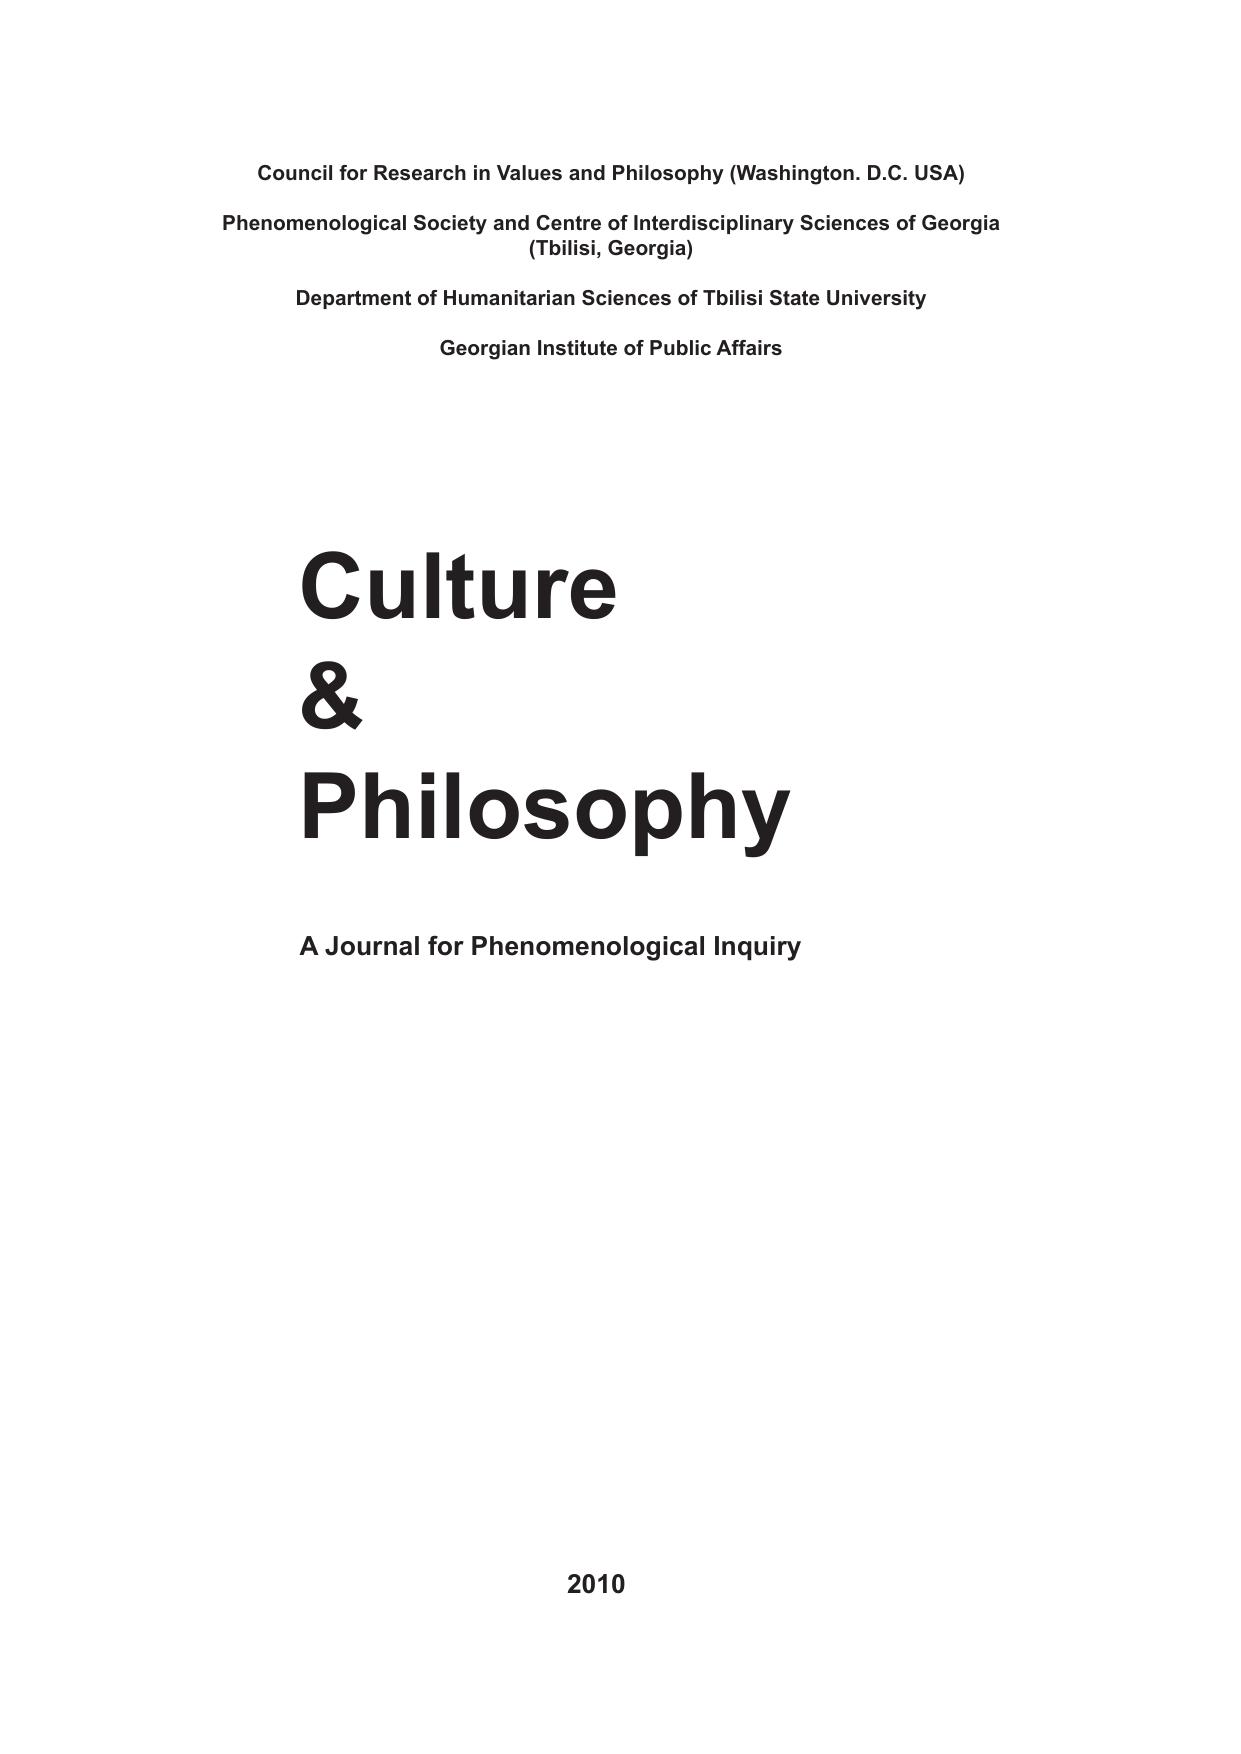 Culture And Philosophy 2010